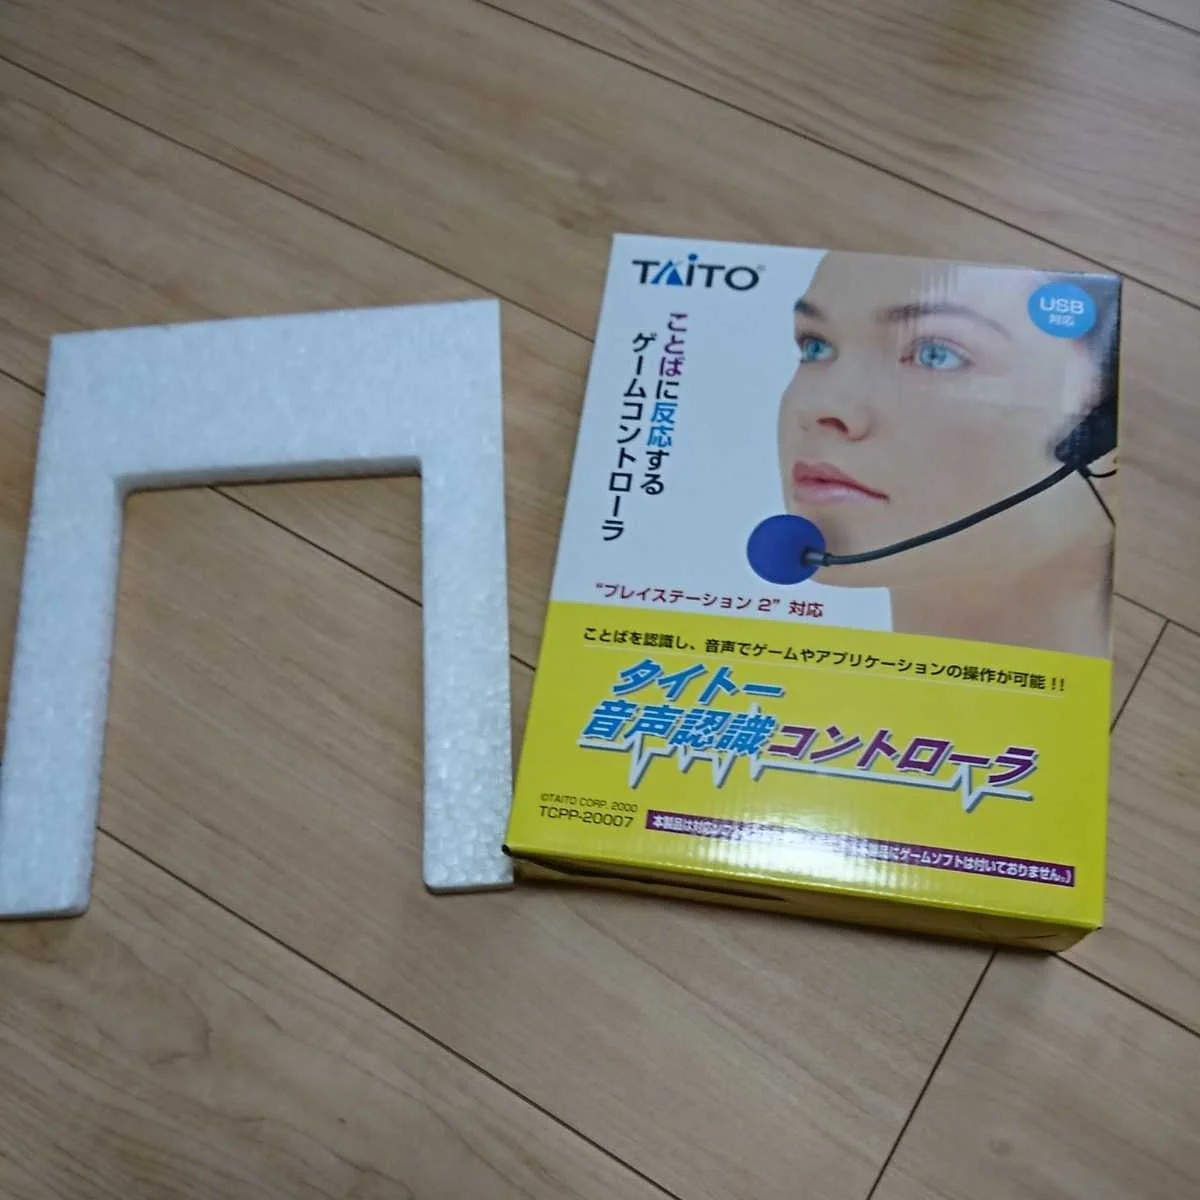  Taito PlayStation 2 Microphone